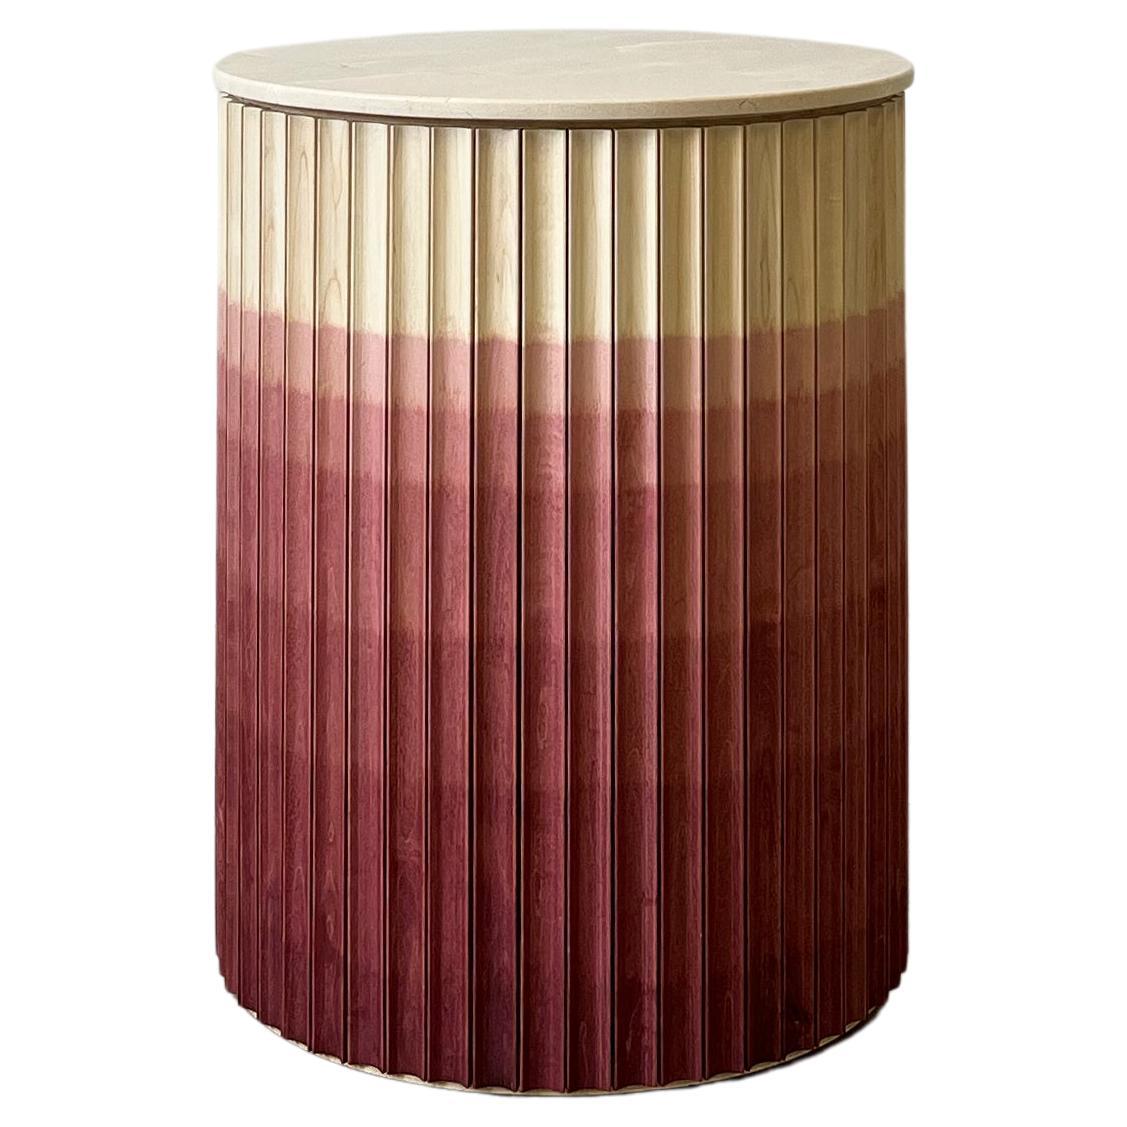 Pilar Round End Table / Copper Red Ombré Maple Wood / Crema Marble Top by INDO- For Sale